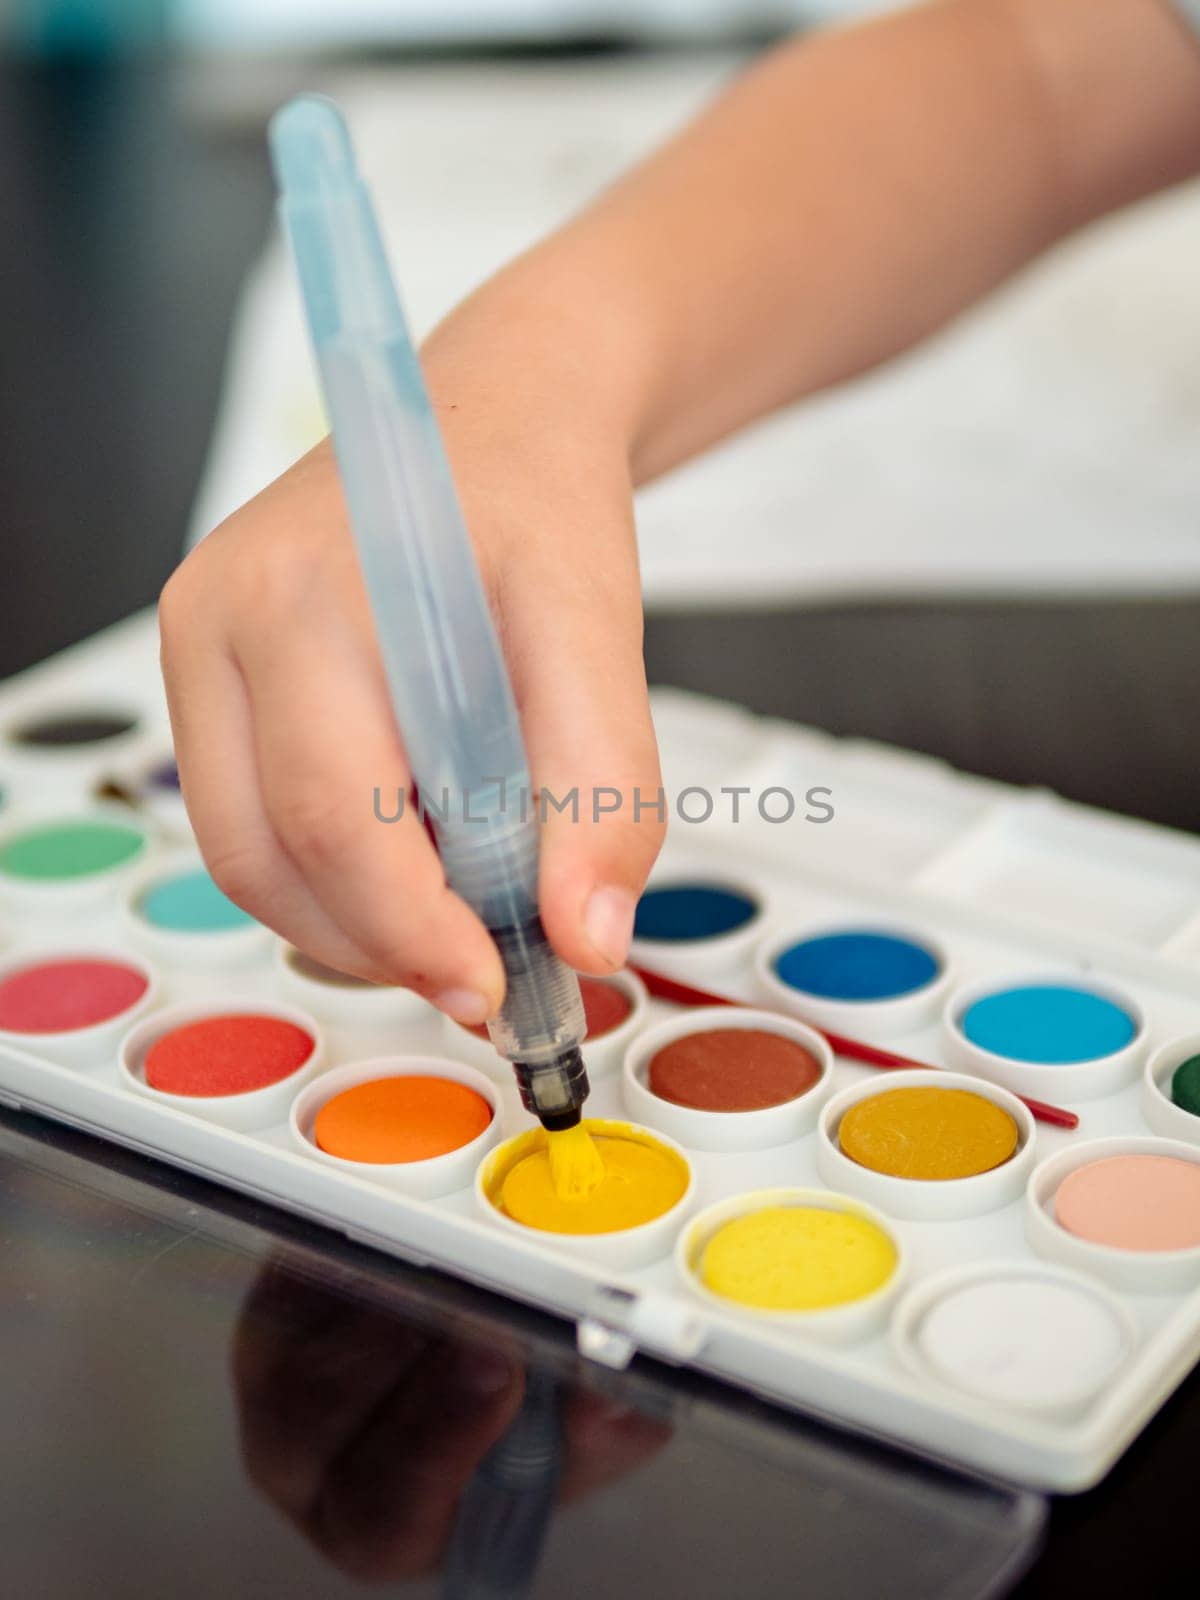 The boy paints with watercolors. Child picking up paint on brush, use brush with integrated water container or water brush. Close up, focus on waterbrush